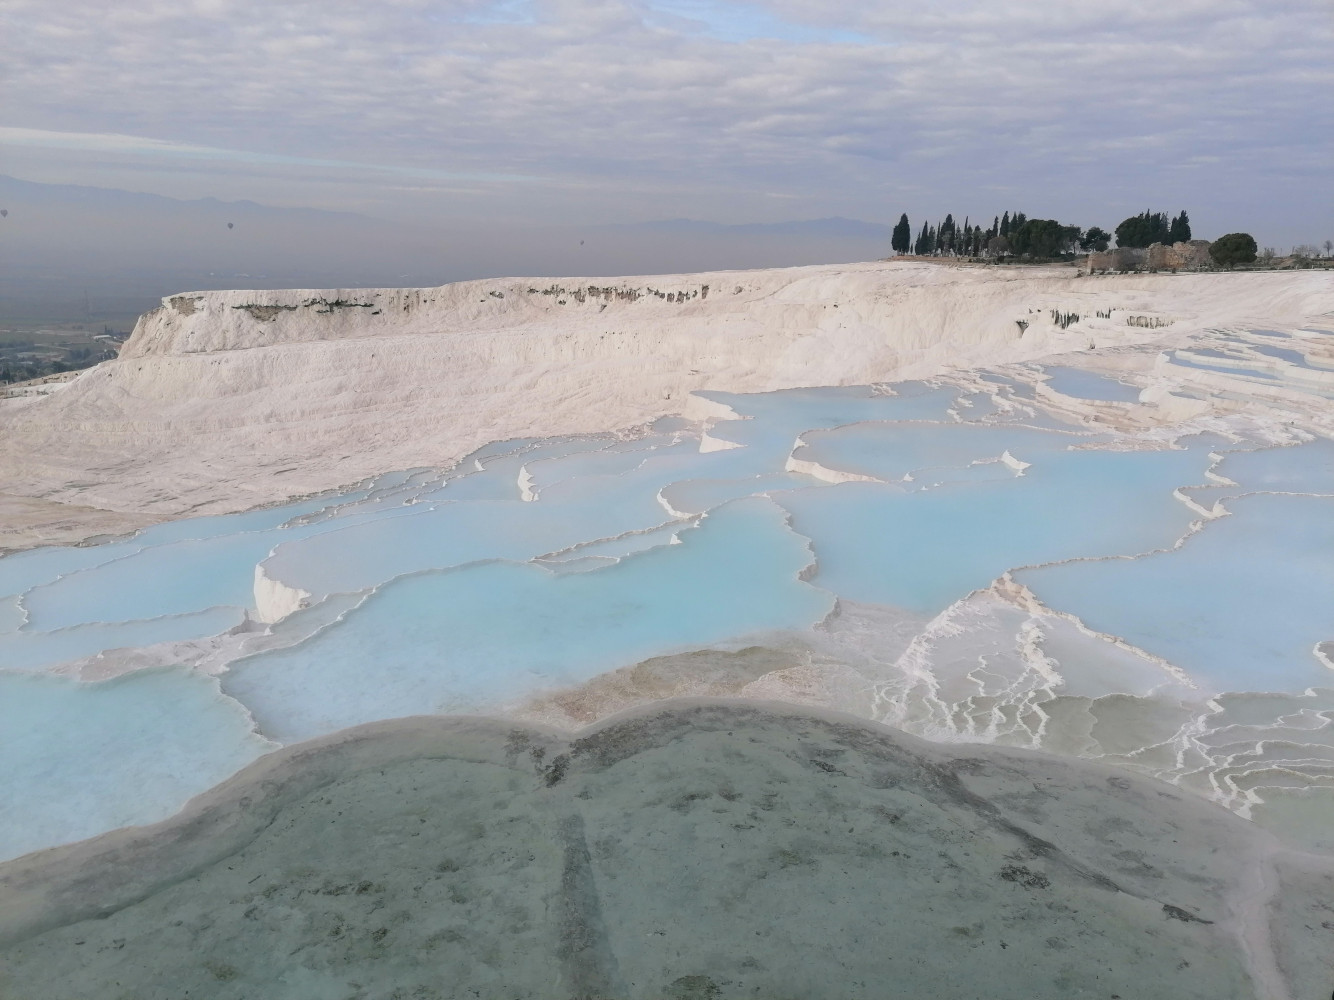 Daily Pamukkale, Colossae and Laodicea Biblical Cities Tour